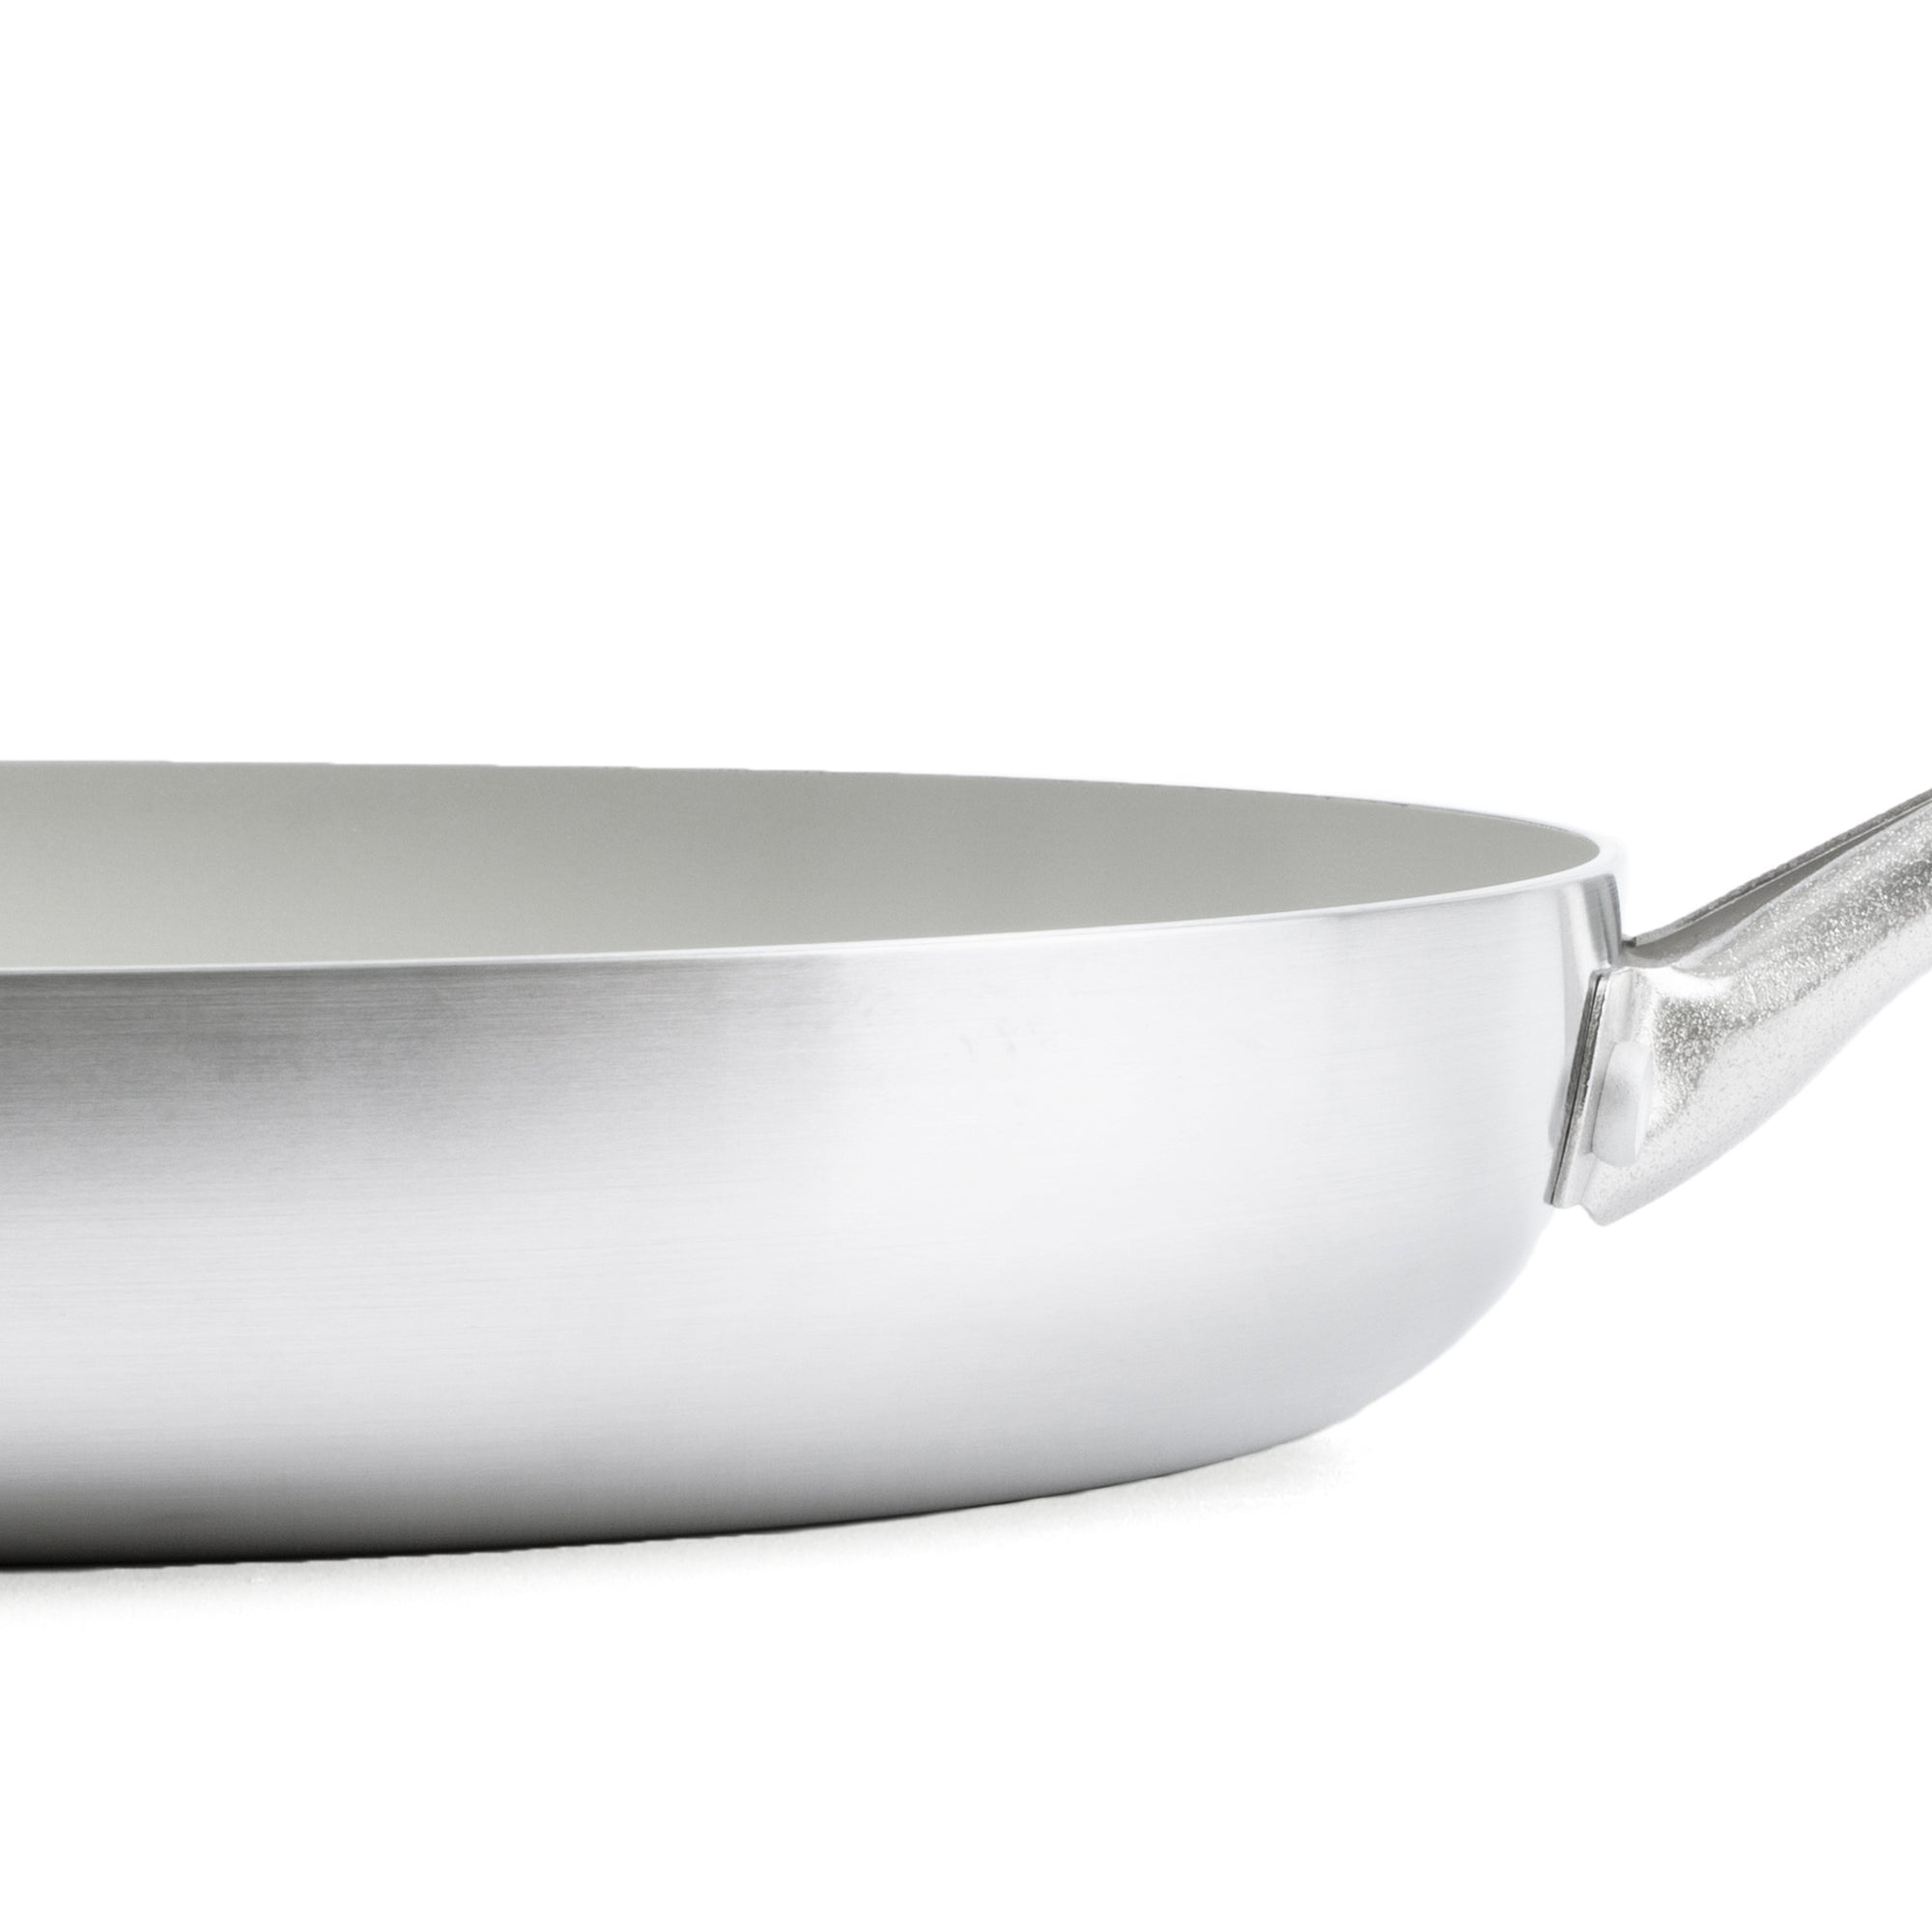 Stainless Steel Healthy Ceramic Nonstick, 8 Frying Pan Skillet, PFAS-Free,  Multi Clad, Induction, Dishwasher Safe